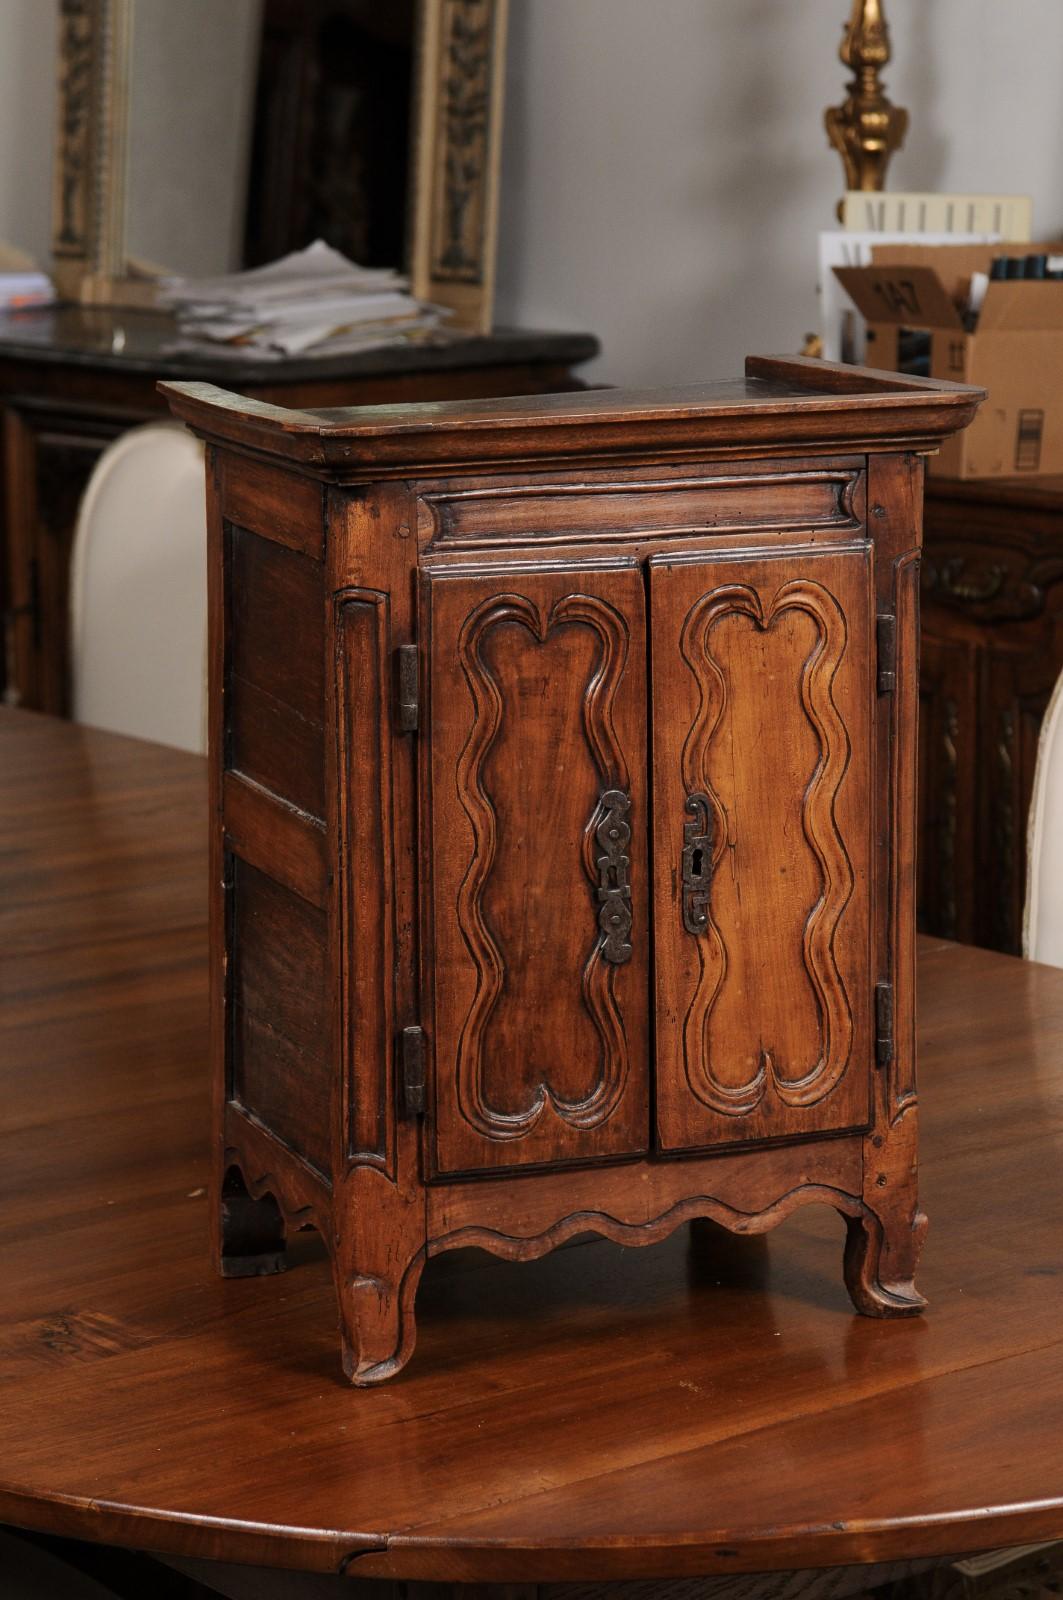 A French Napoléon III period miniature walnut armoire from the mid 19th century, with molded panels and scrolling feet. Created in France at the beginning of Emperor Napoléon III's reign, this miniature walnut armoire will make for a great addition